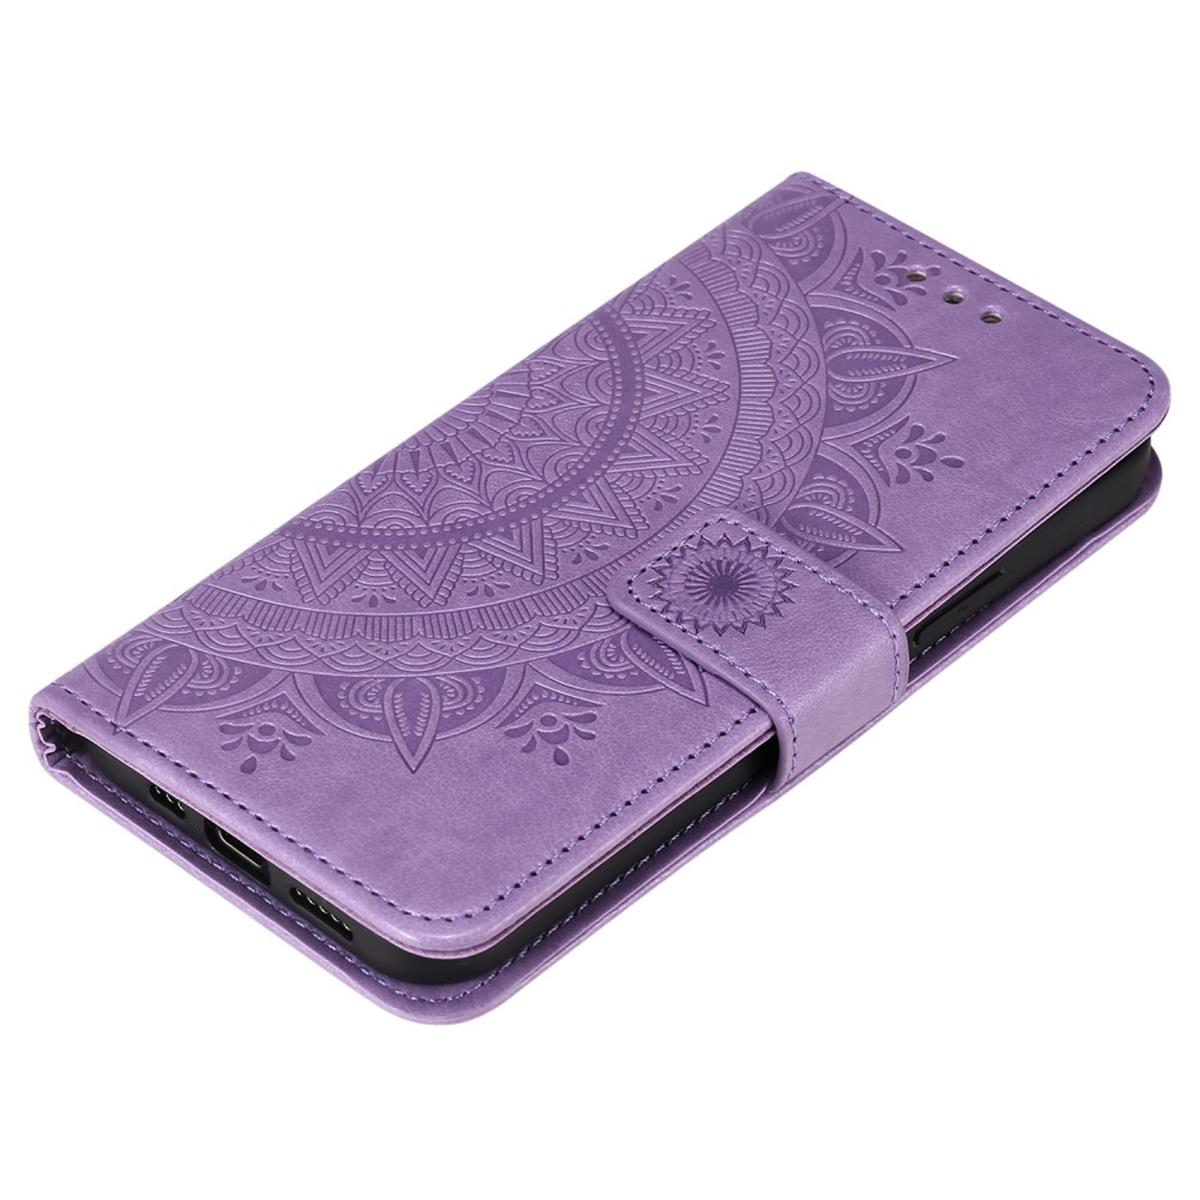 Apple, Pro Bookcover, Max, Muster, Lila Mandala COVERKINGZ iPhone Klapphülle mit 12